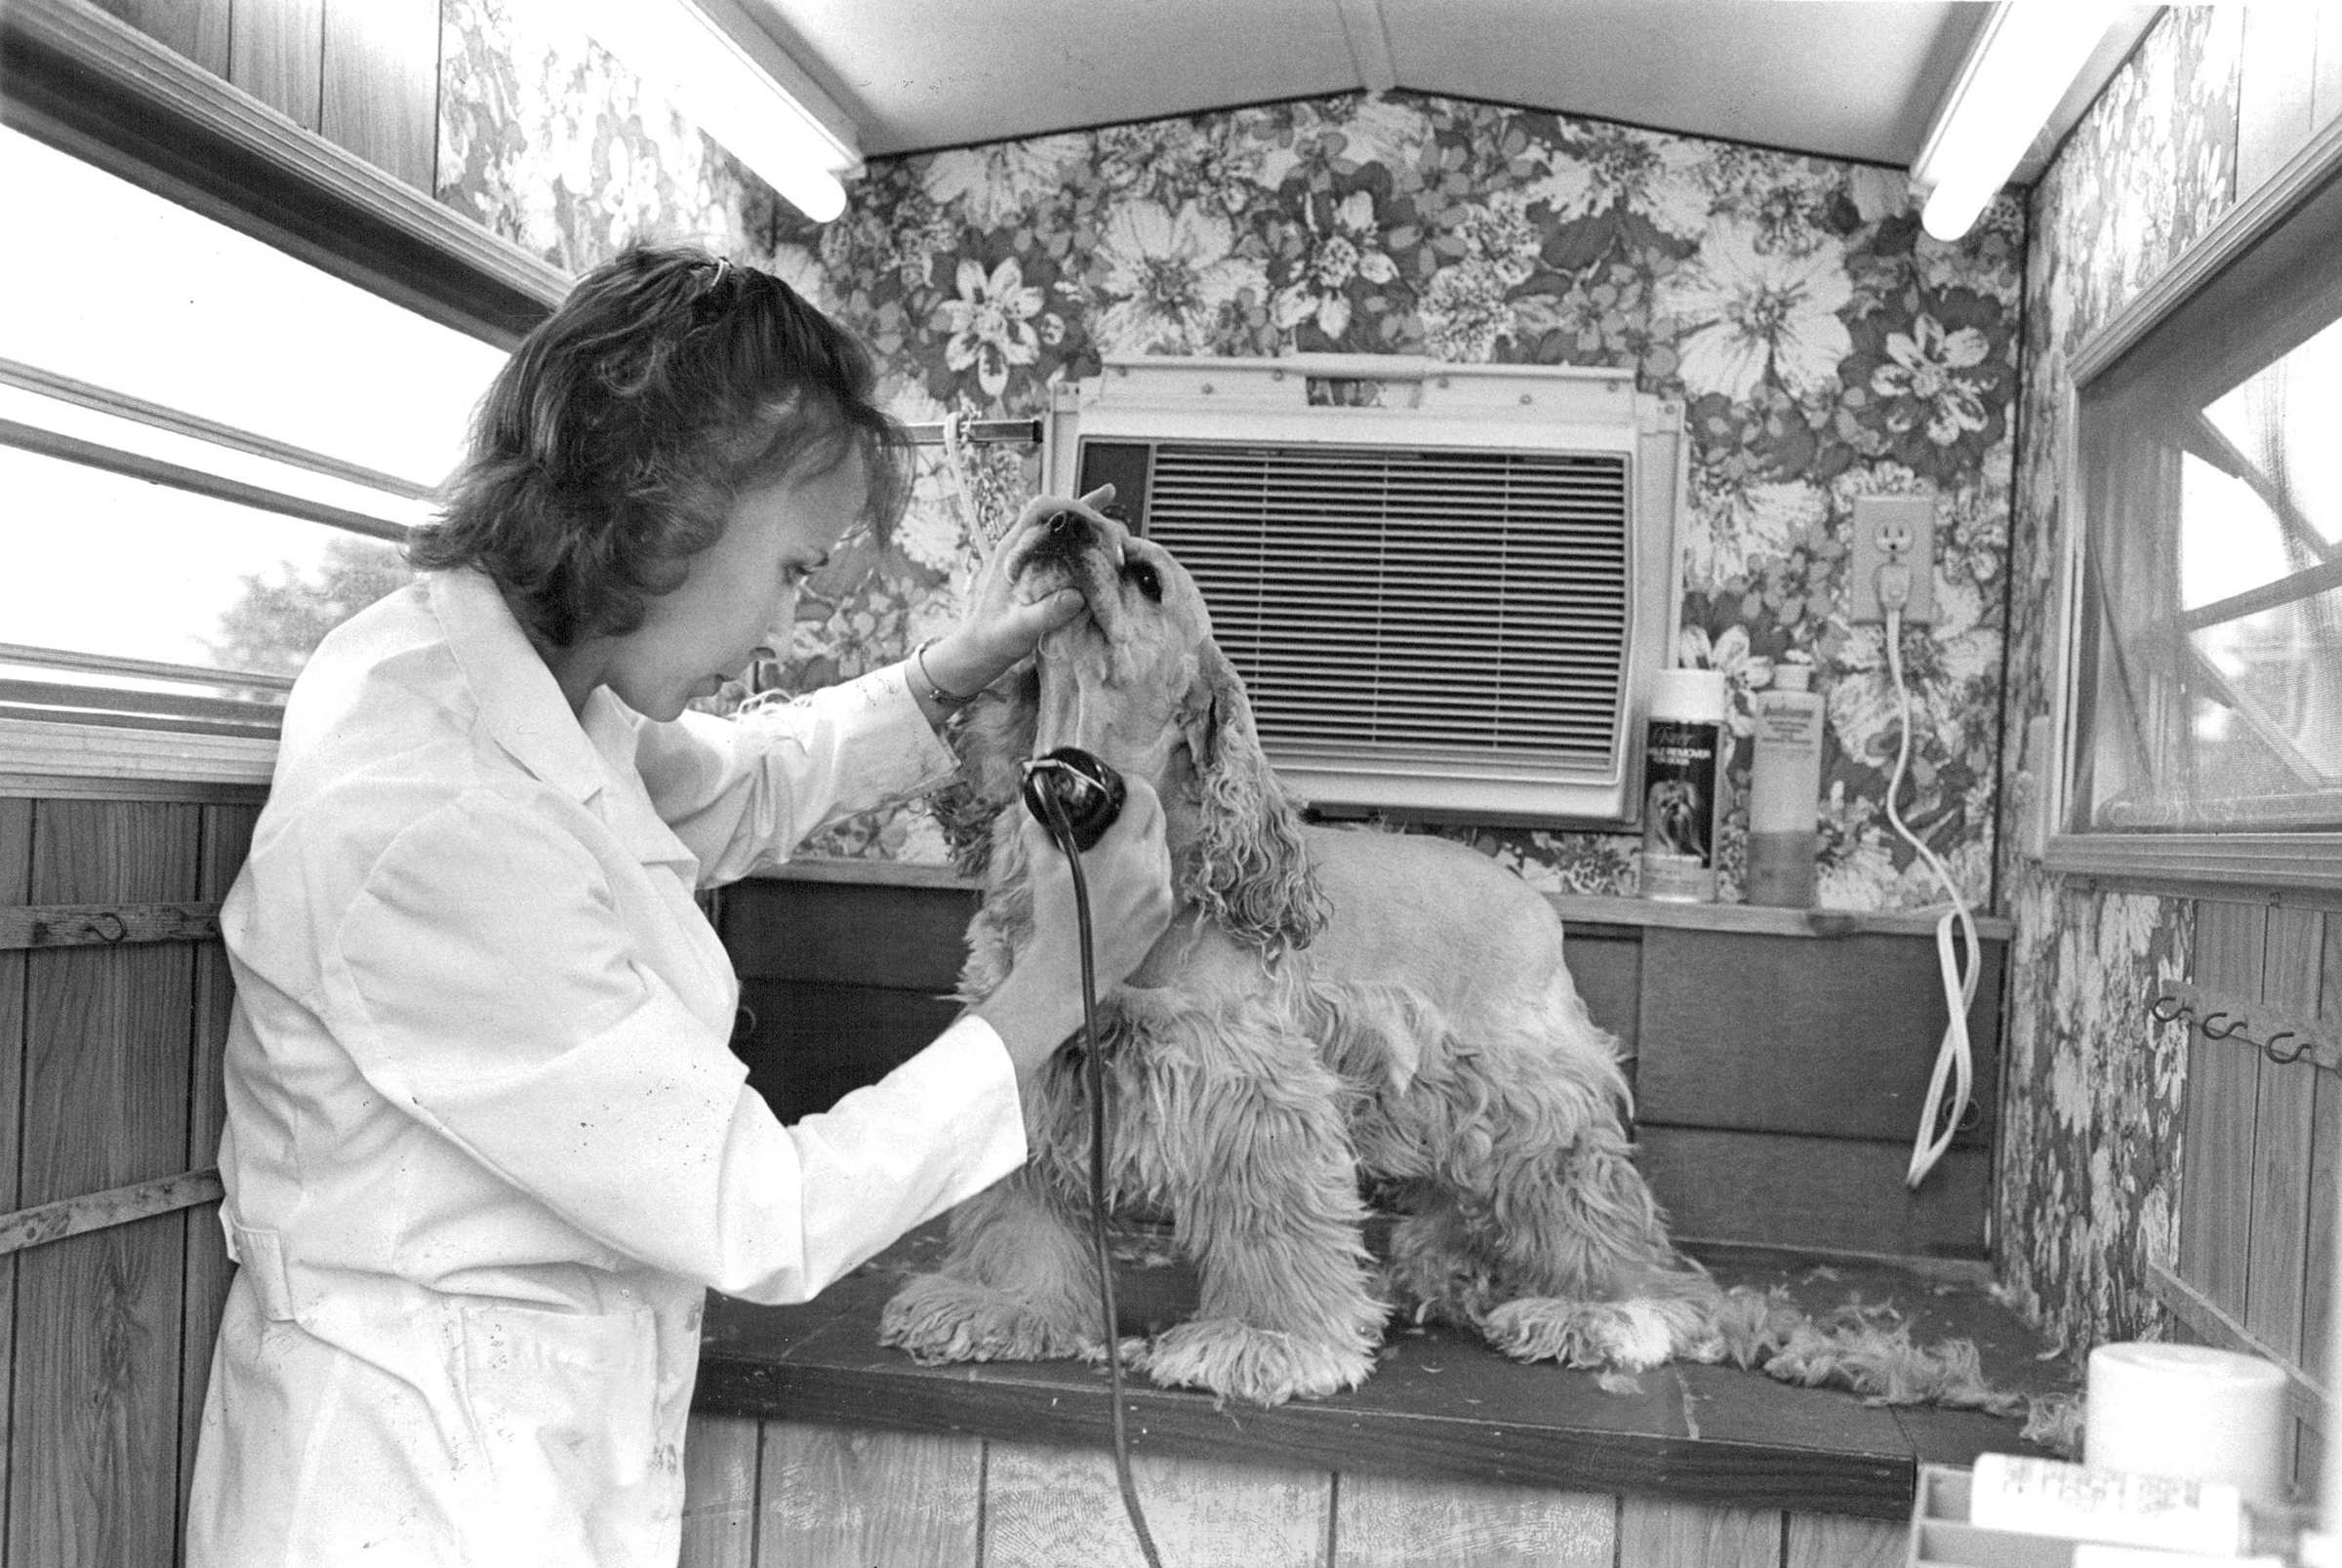 Angela Eaton grooms "Dutchess" inside "House Calls" trailer in 1982. The unit is equipped with a bath, heater, air conditioner and dryer. (Ed Maker—The Denver Post/Getty Images)